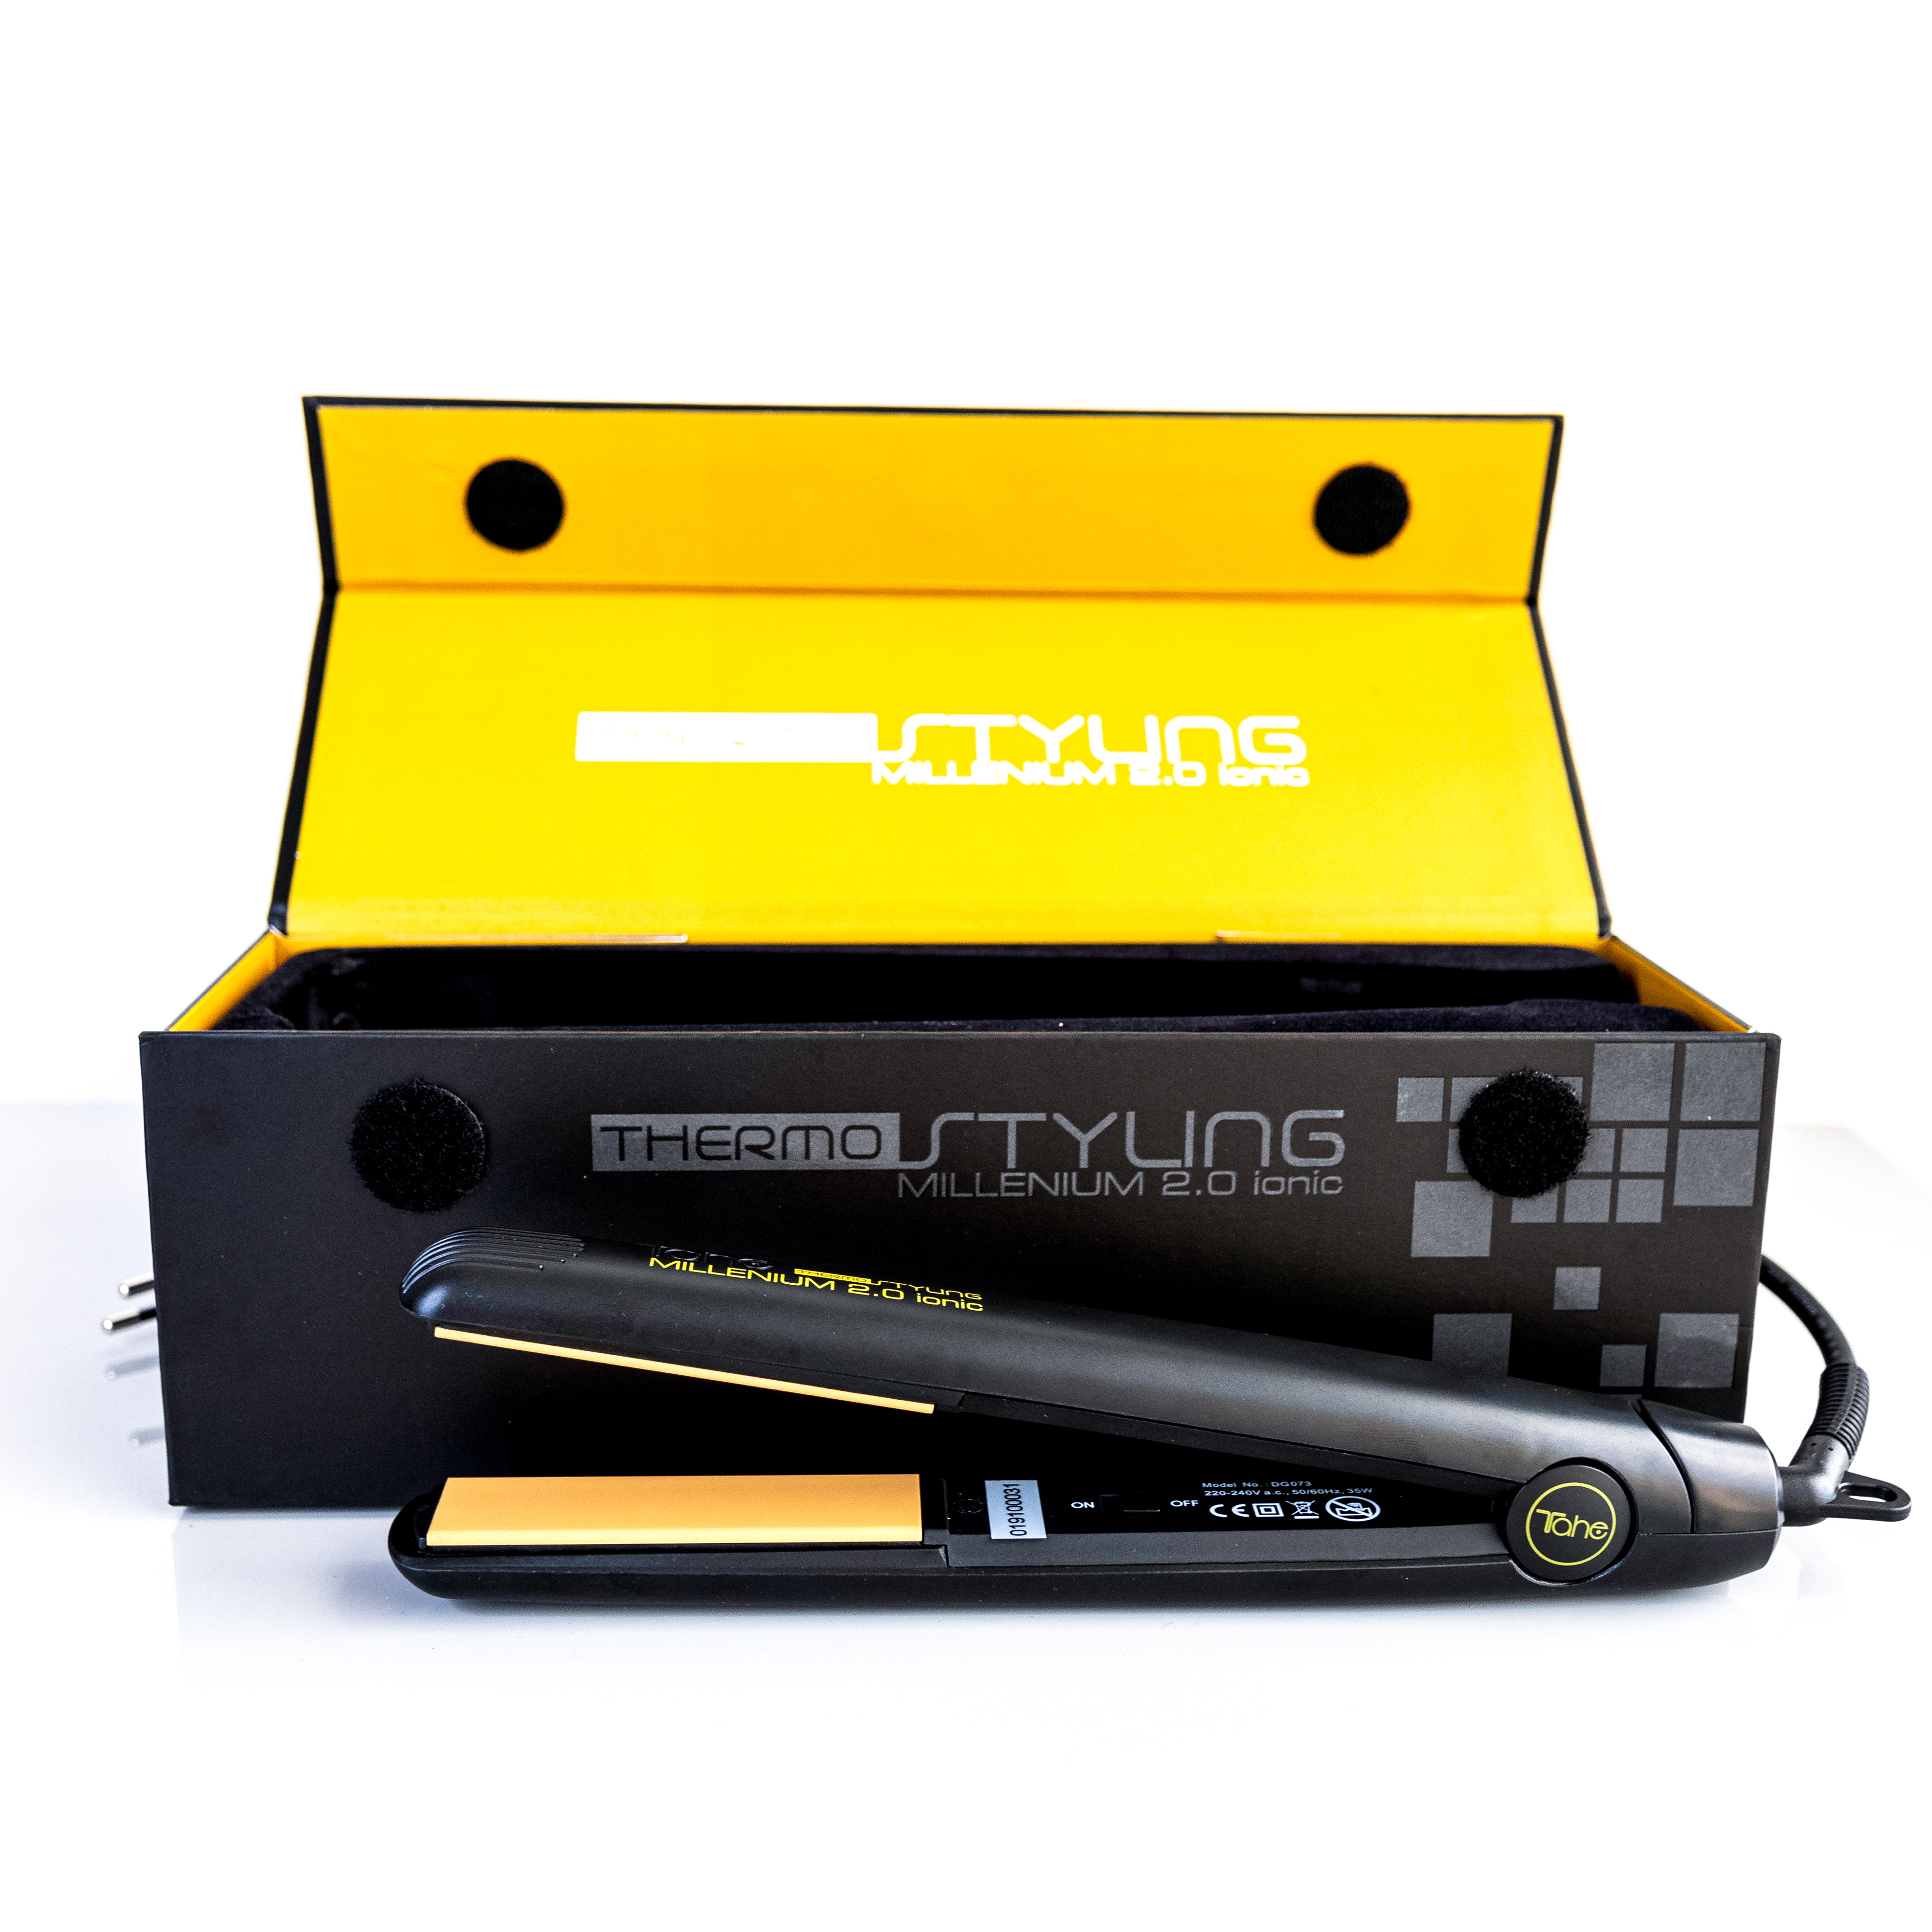 TAHE PLANCHA MILLENIUM 2.0 IONIC THERMOSTYLING